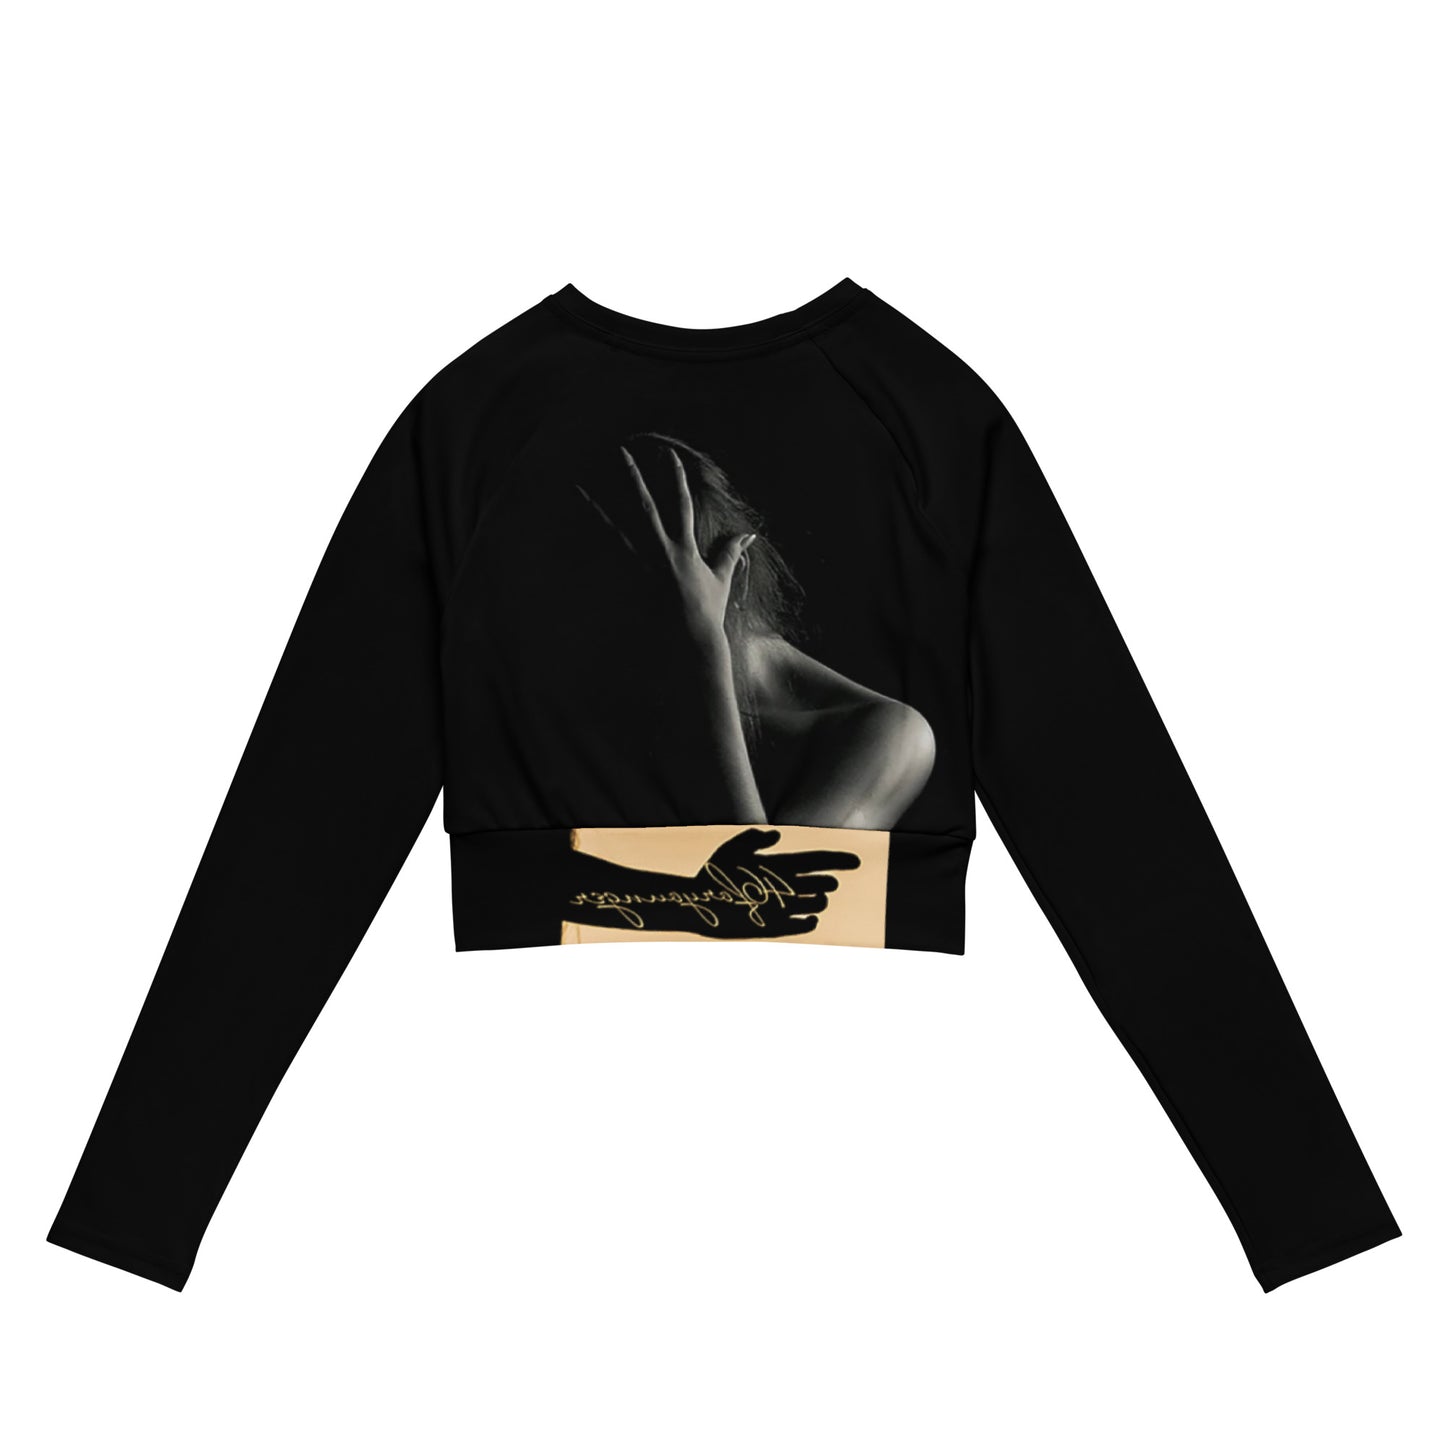 A-Ray of Emotions Long-Sleeve Crop Top - Plus Size